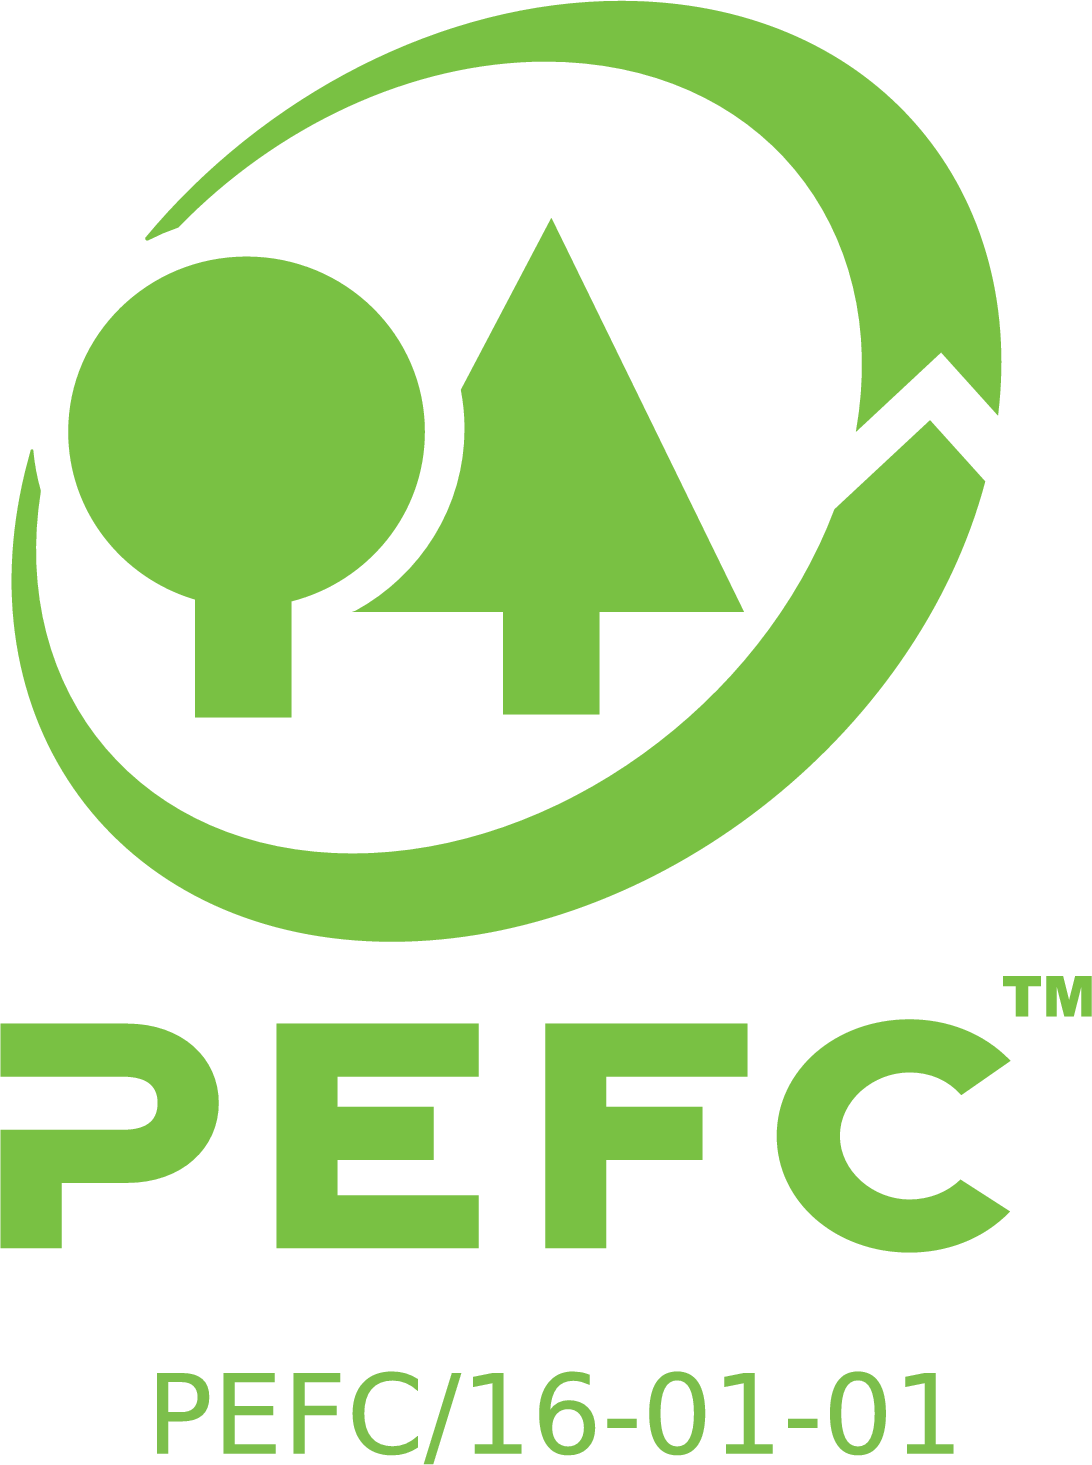 Cirtification Logo - PEFC Homepage. The world's largest forest certification organisation ...